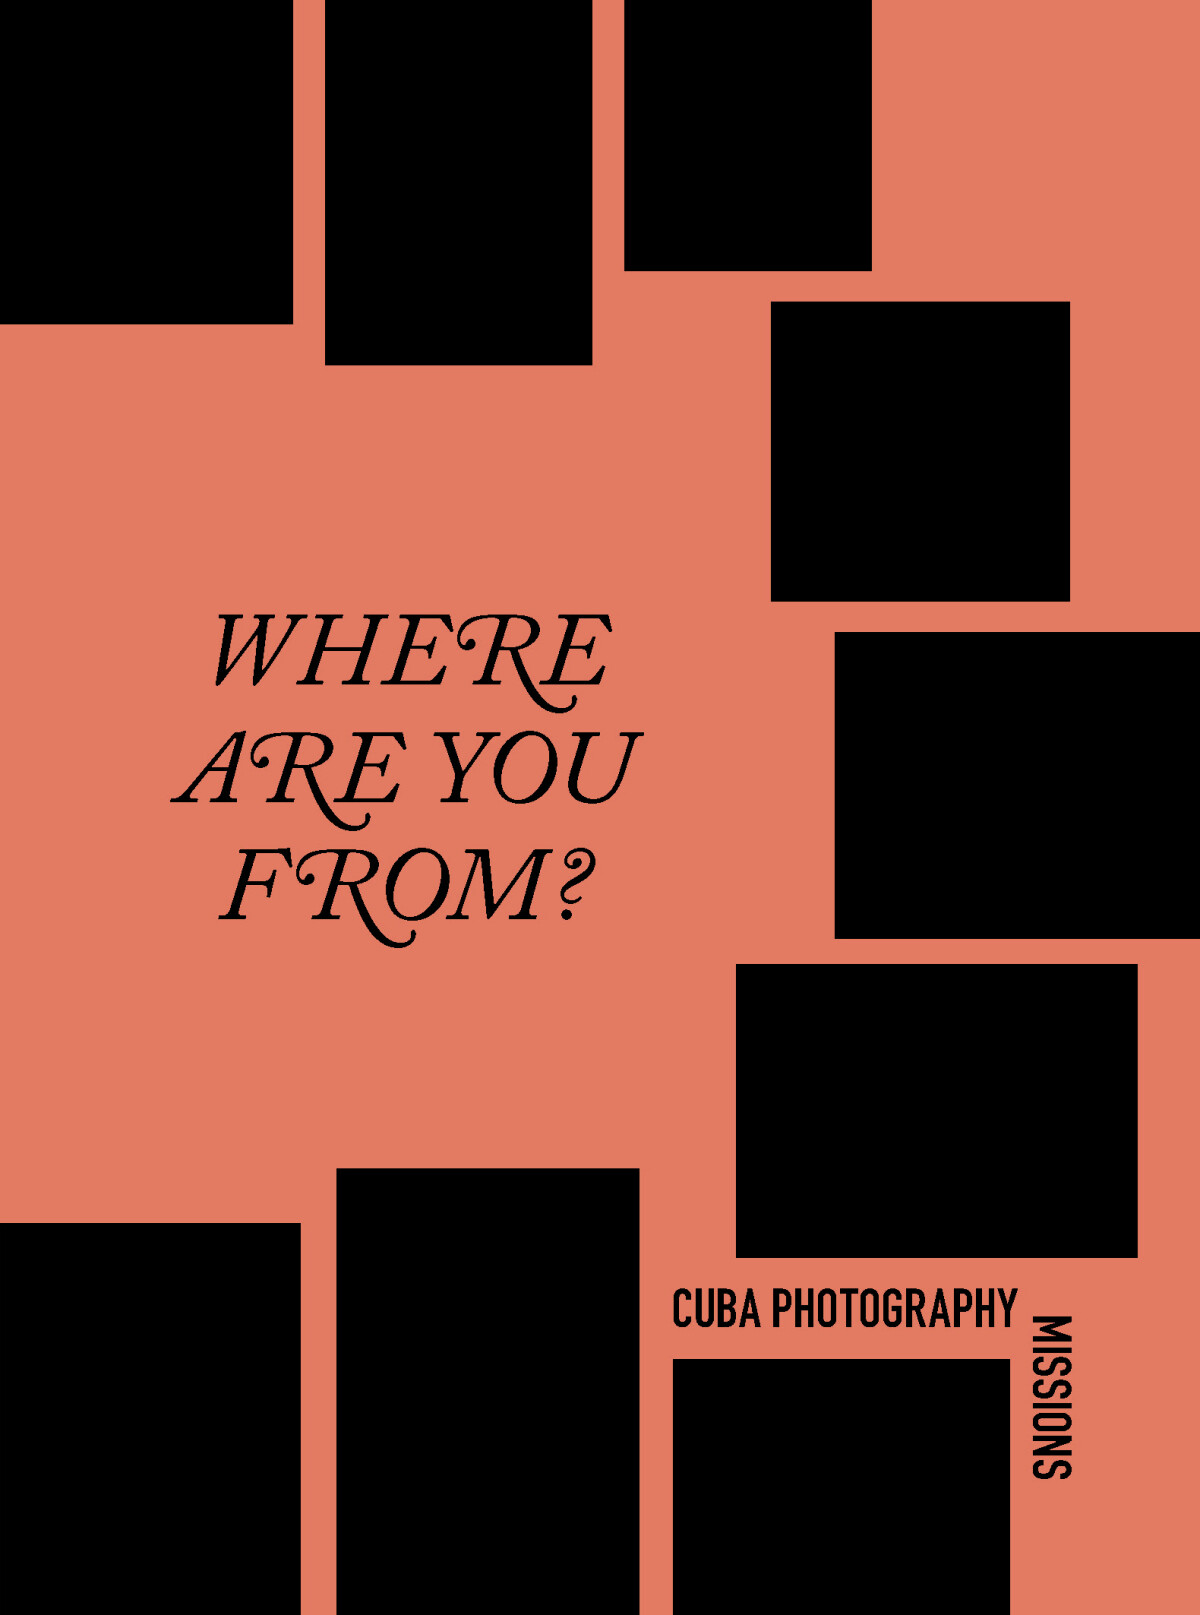 Cuba Photography Missions - Where are you from?